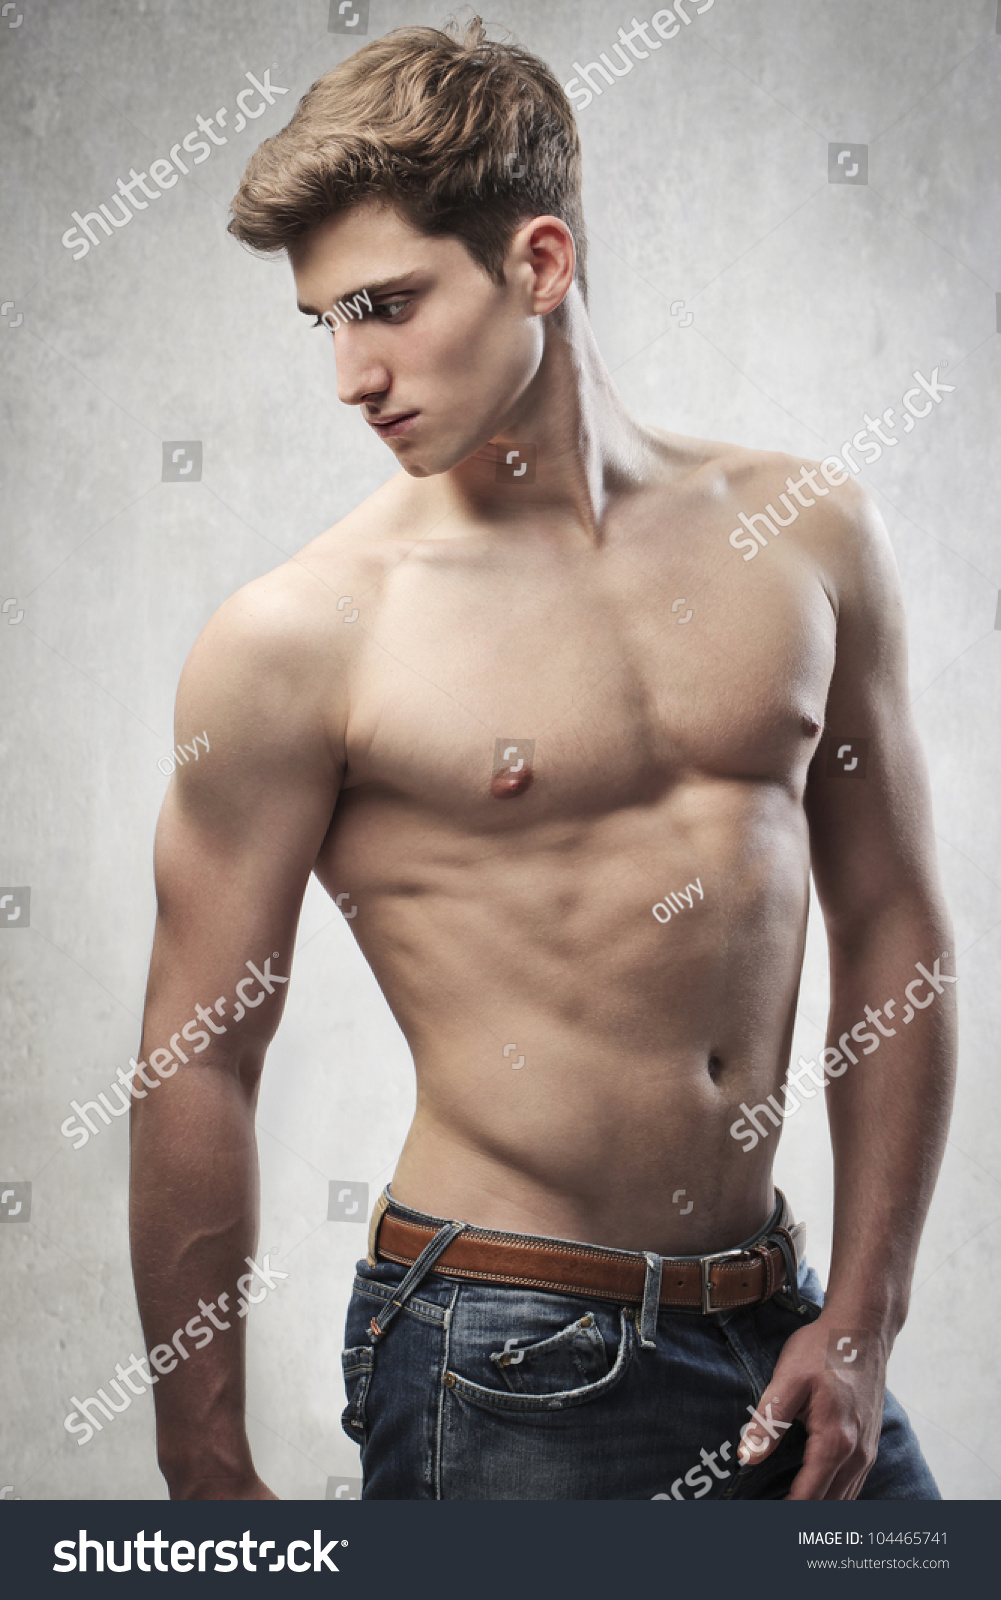 Young Handsome Muscular Man Bare Chested Stock Photo 